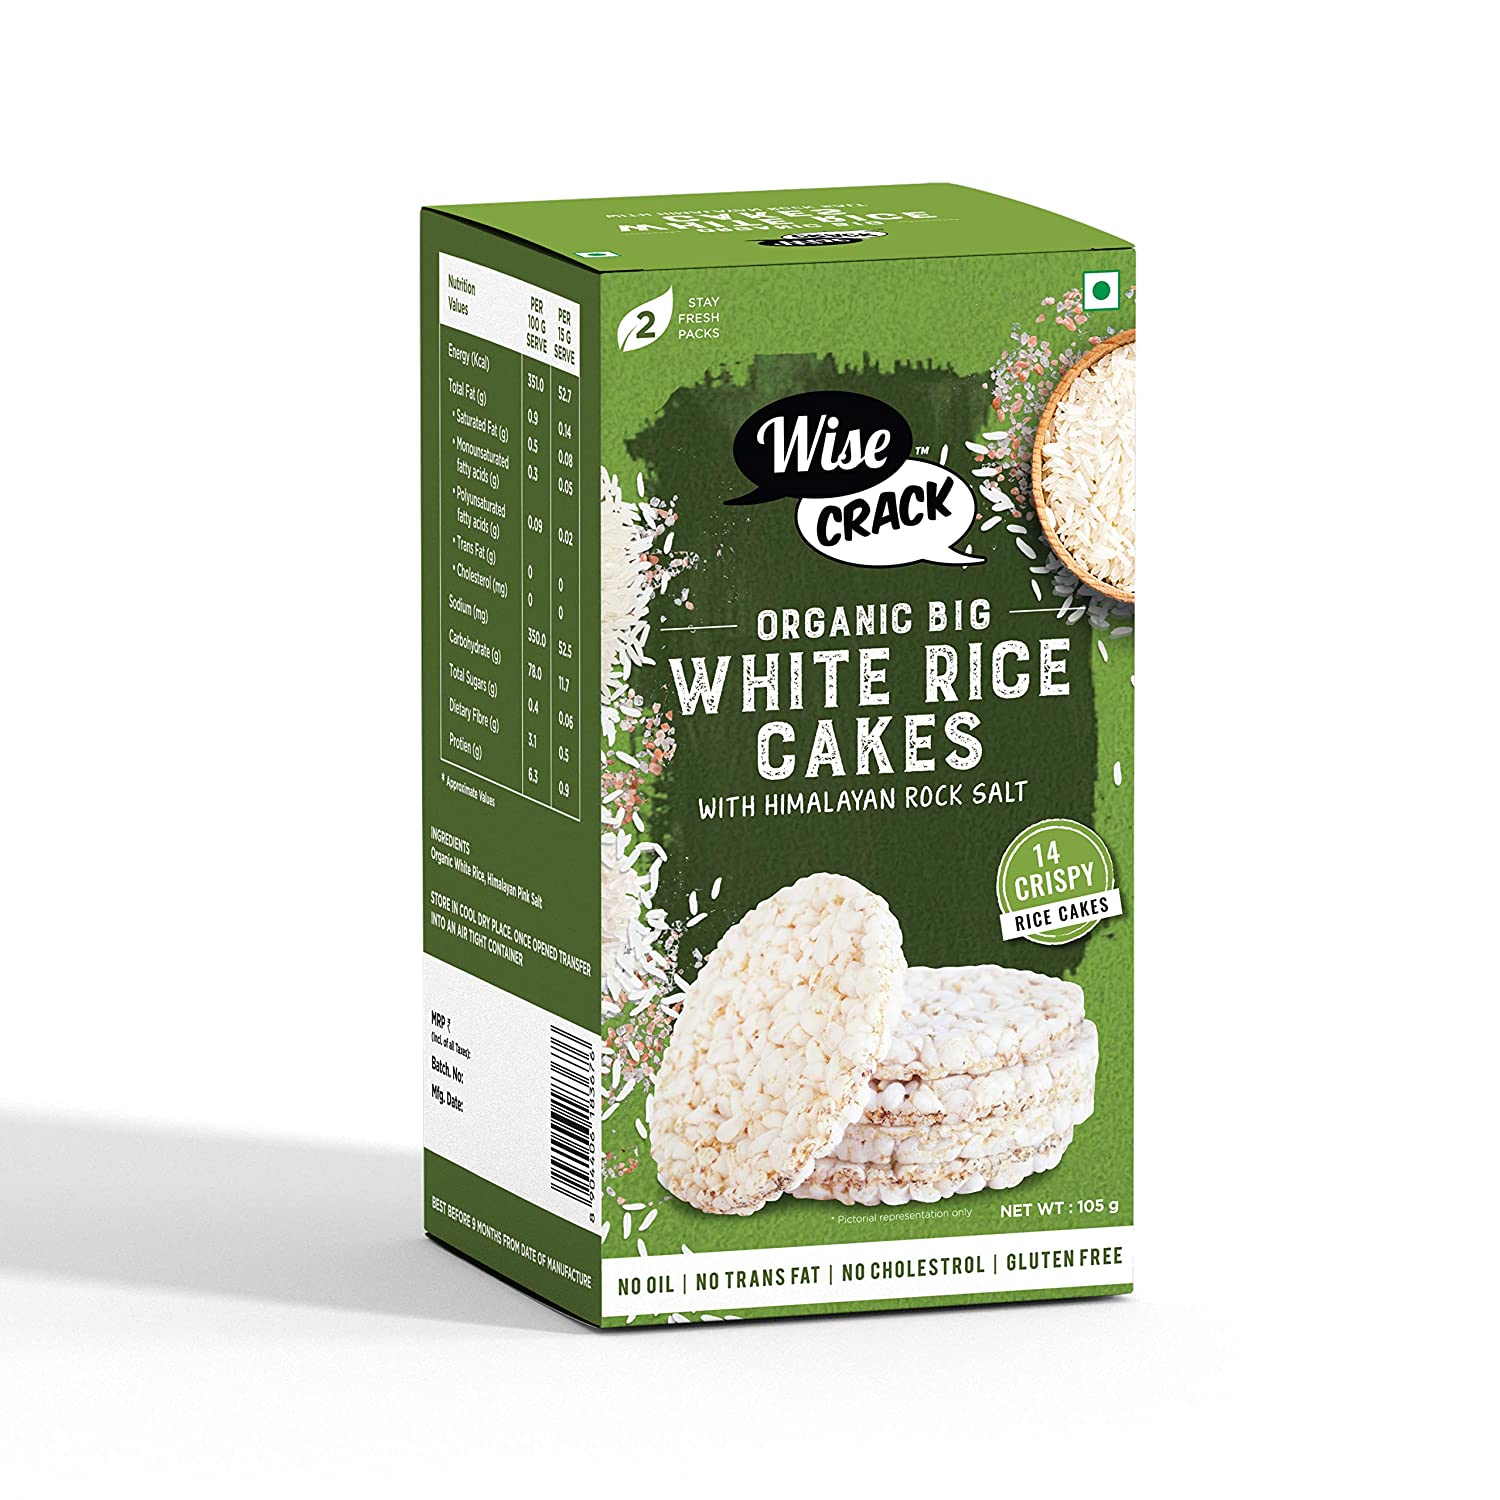 ELEMENT Snacks to “reinvent” rice cakes with $2 million in seed funds